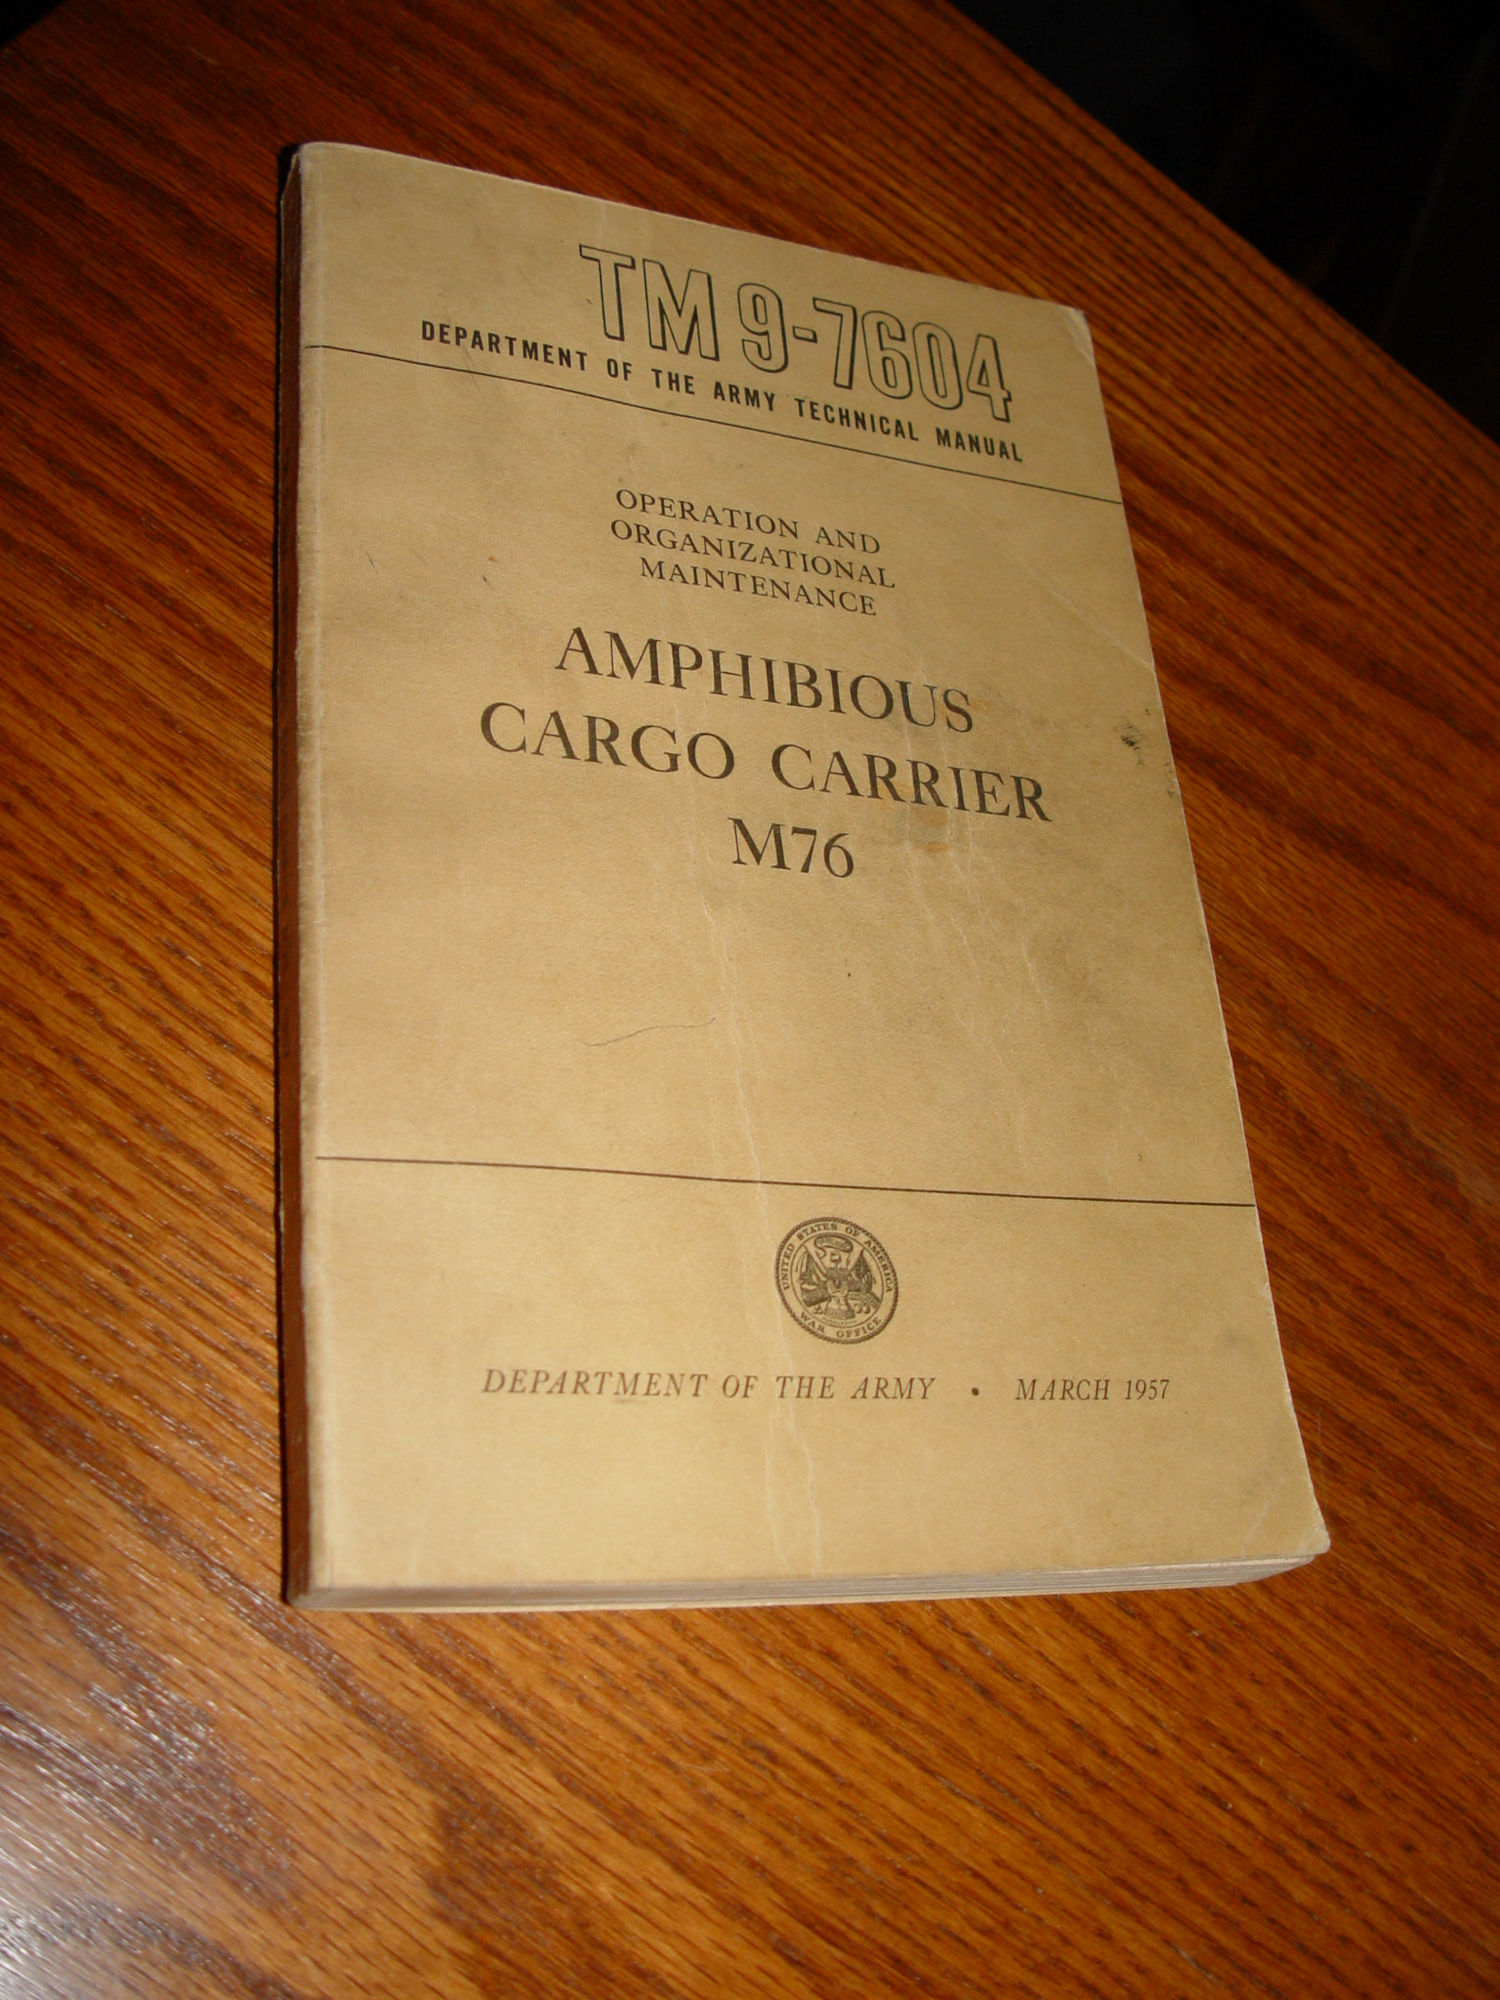 Amphibious cargo
                        carrier M76, Army Technical Manual 1957